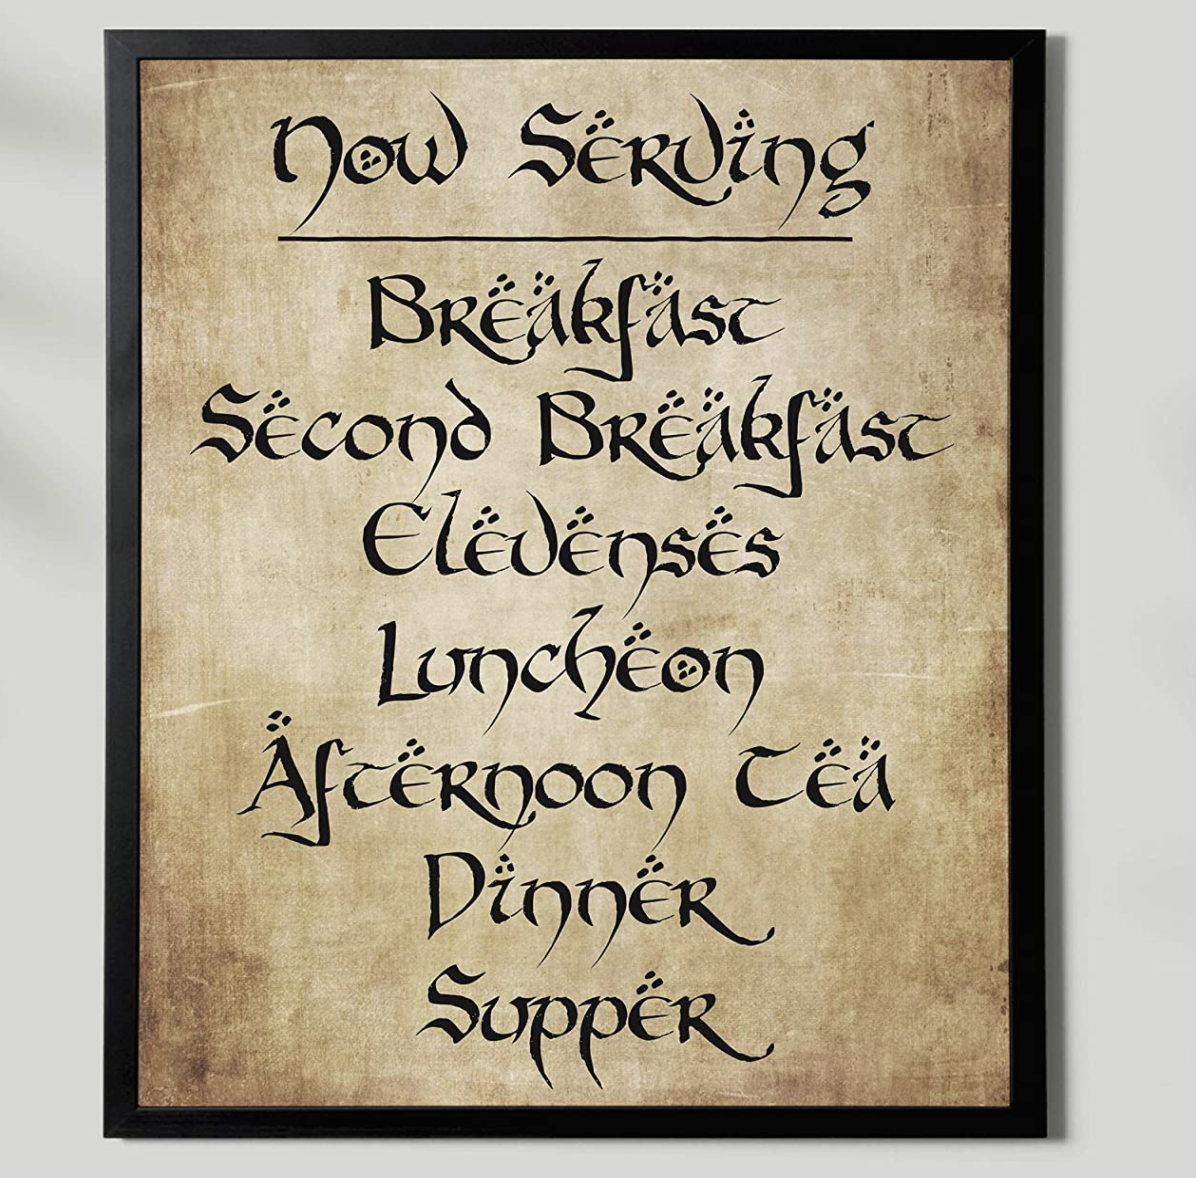 Sign that lists all seven hobbit meals in old time-y font